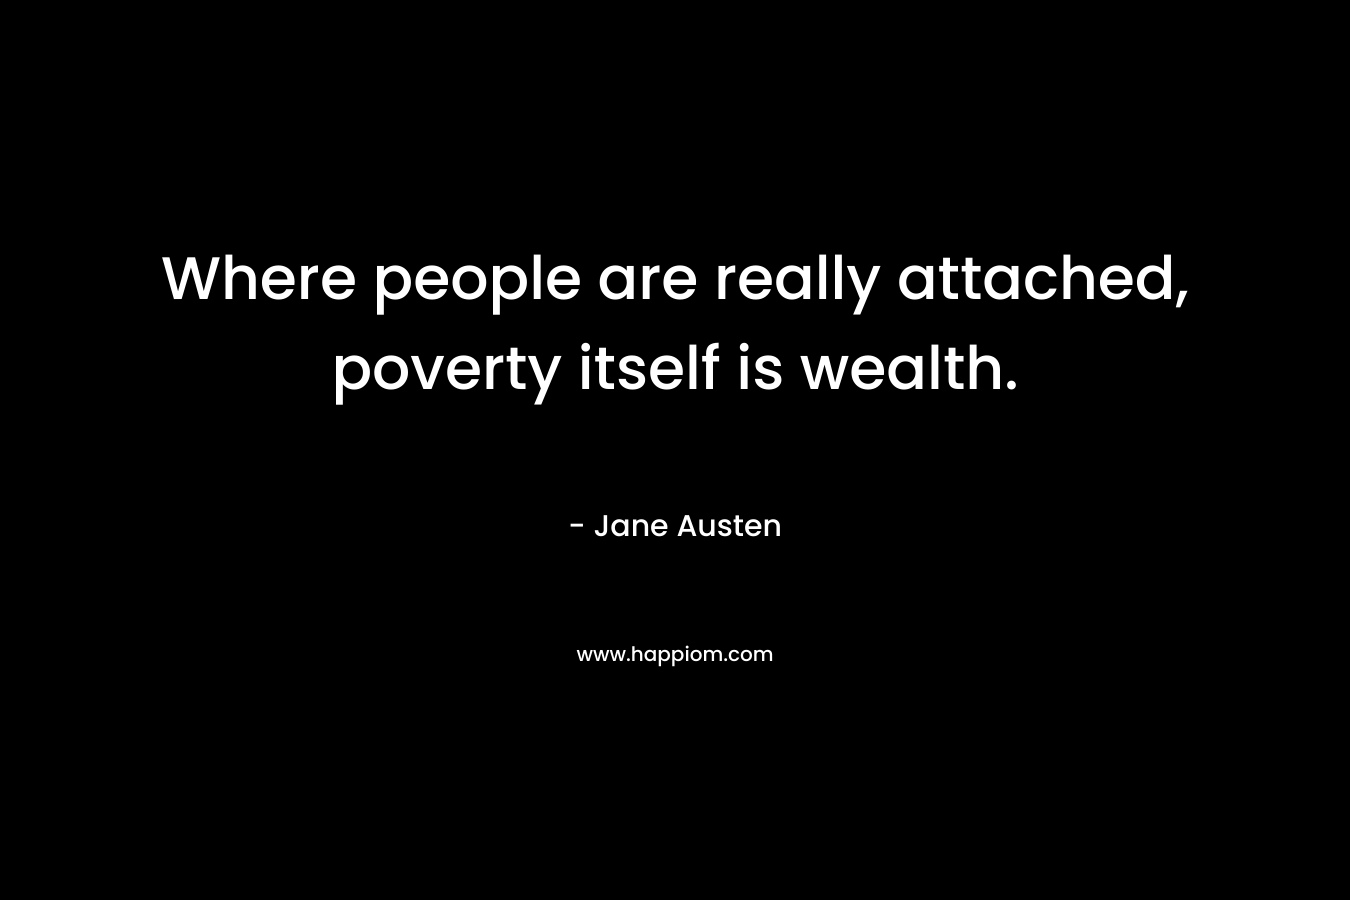 Where people are really attached, poverty itself is wealth.